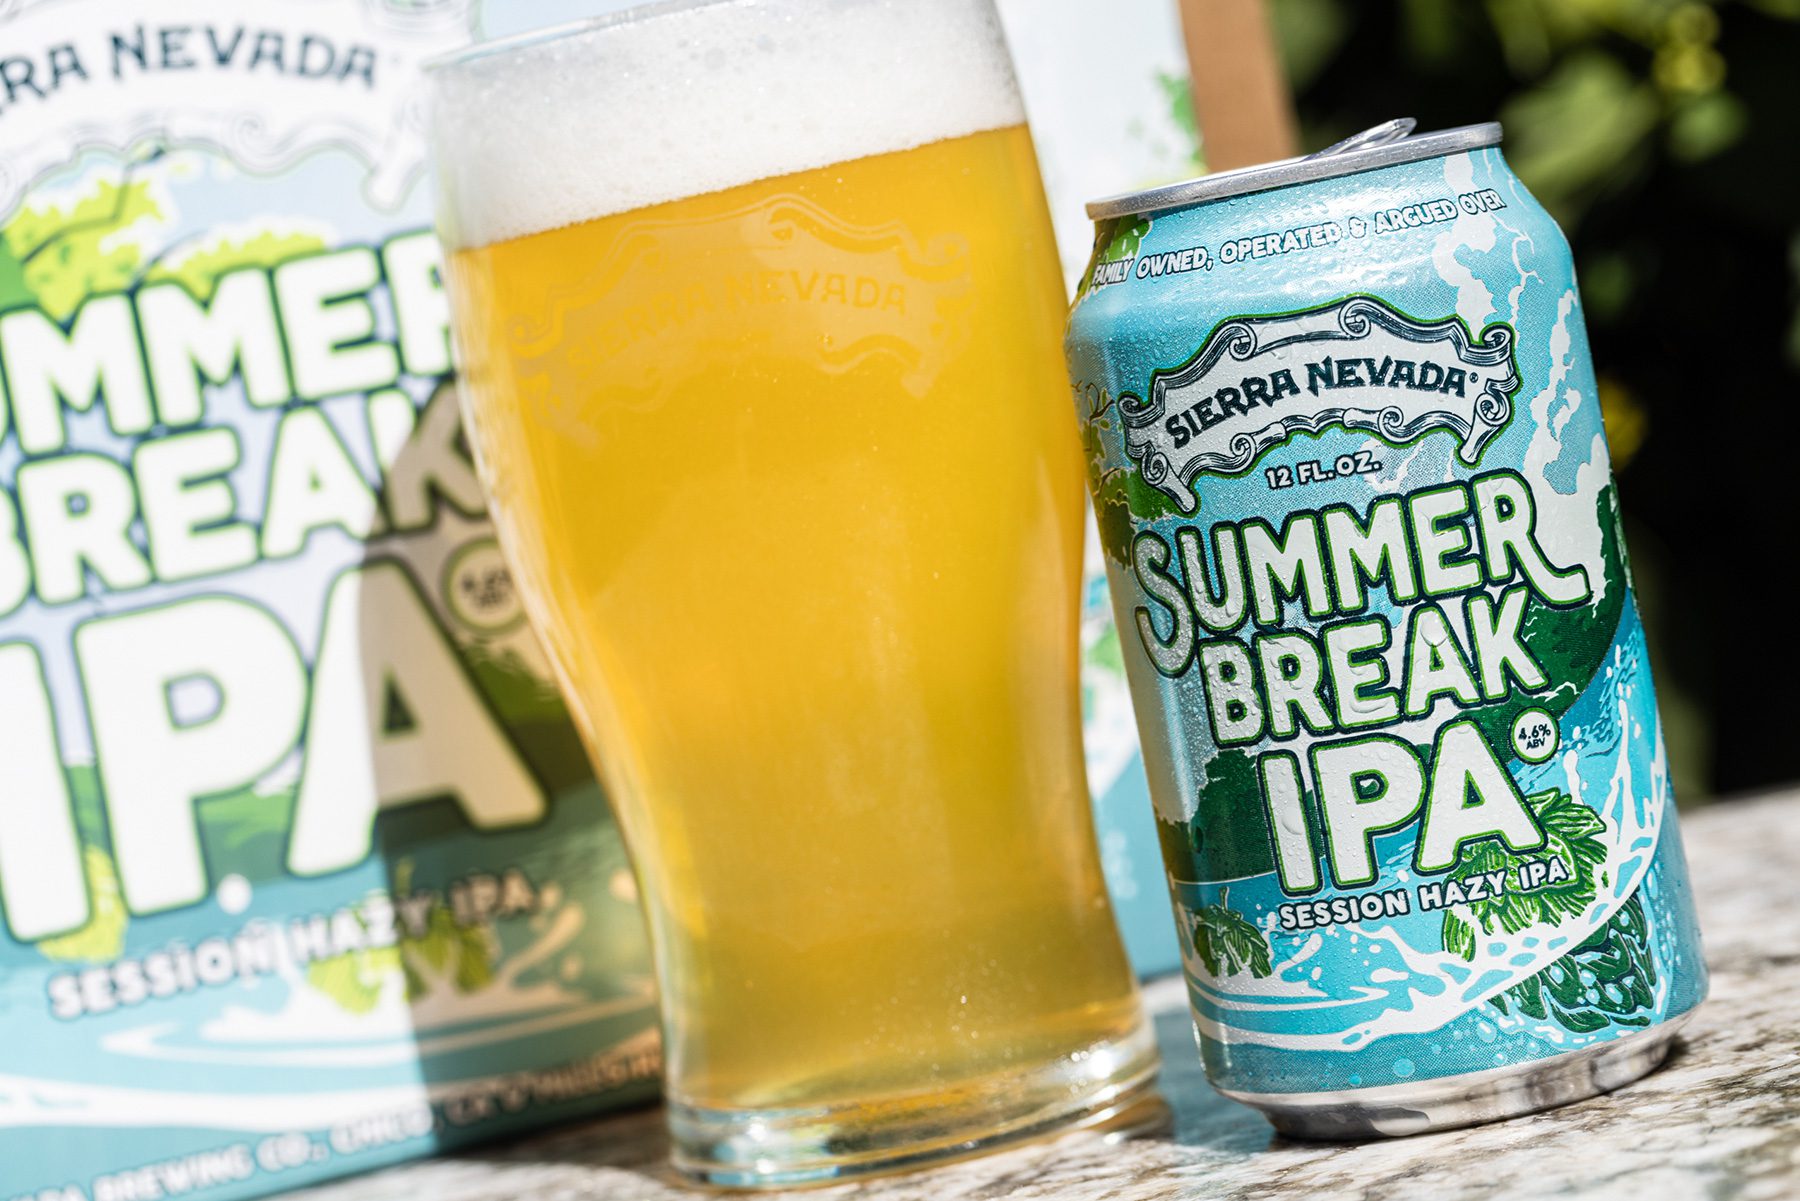 A can and full glass of Summer Break IPA